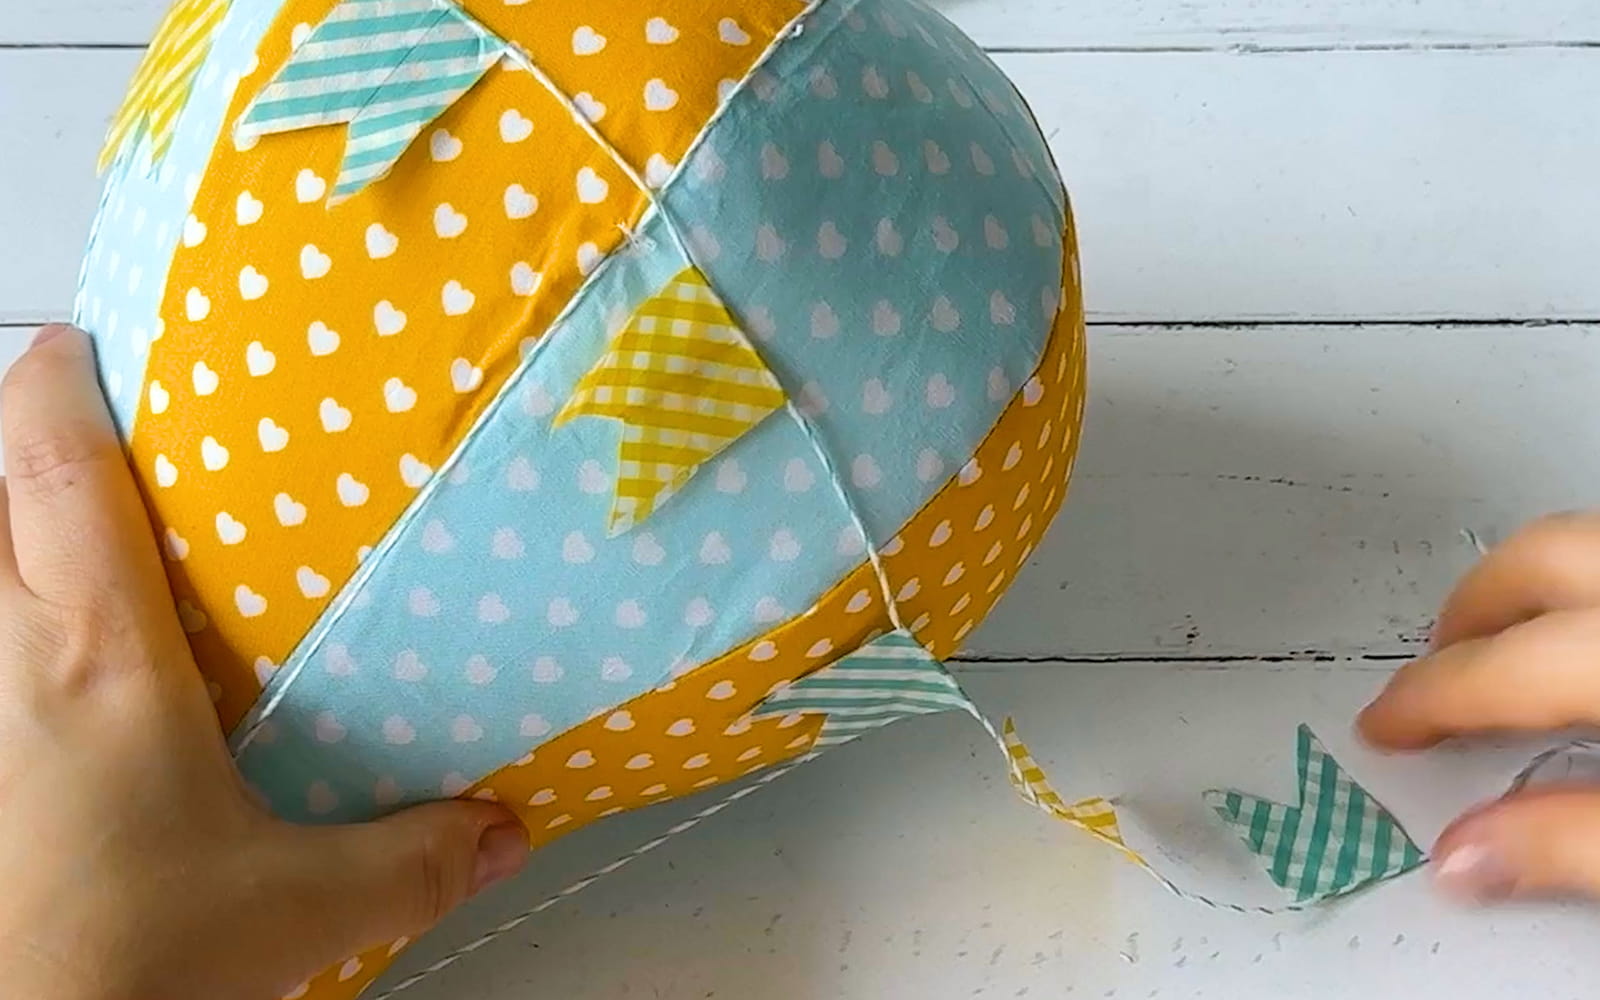 Washi tape bunting being tied to stuffed toy hot air balloon.